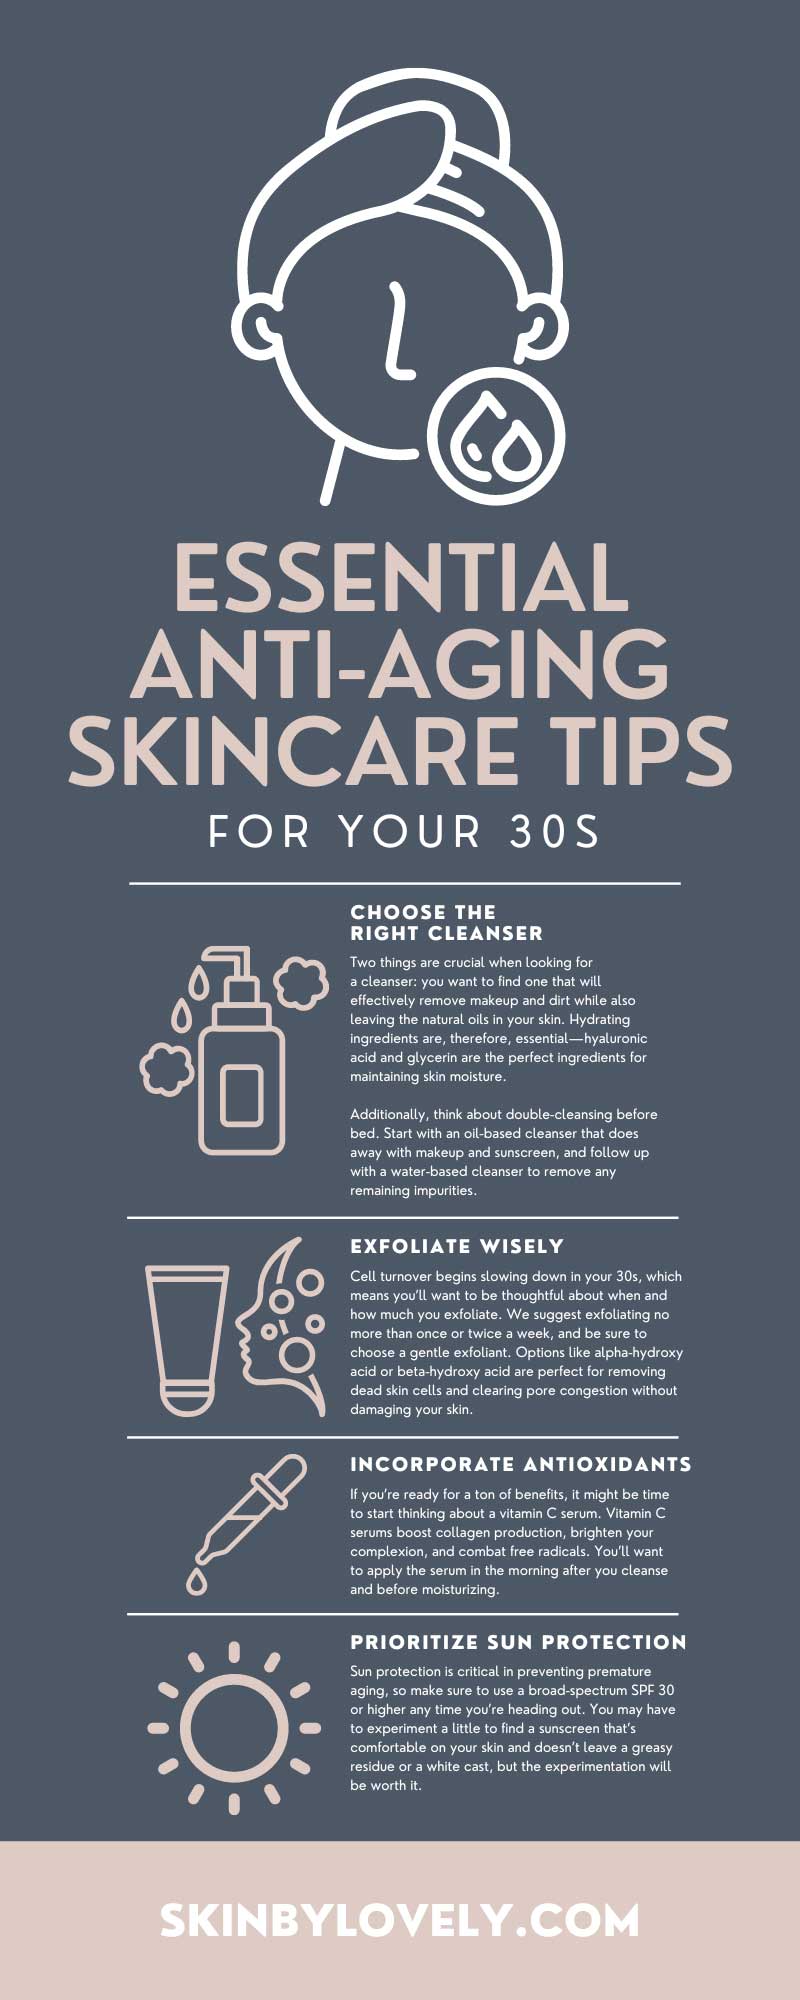 Essential Anti-Aging Skincare Tips for Your 30s